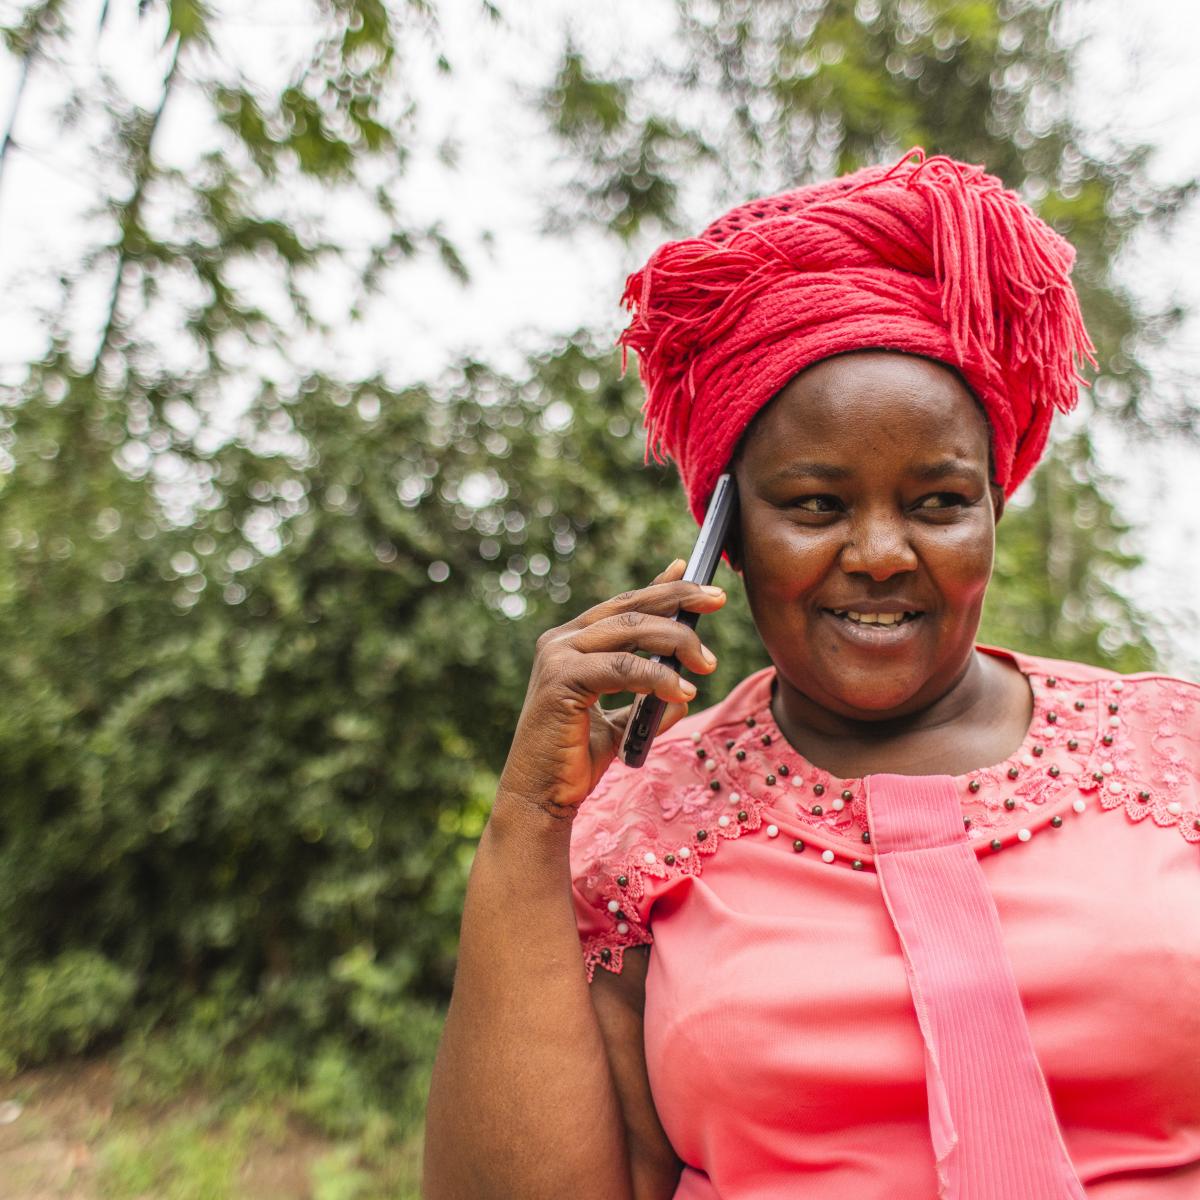 A woman holds a smartphone up to her ear.